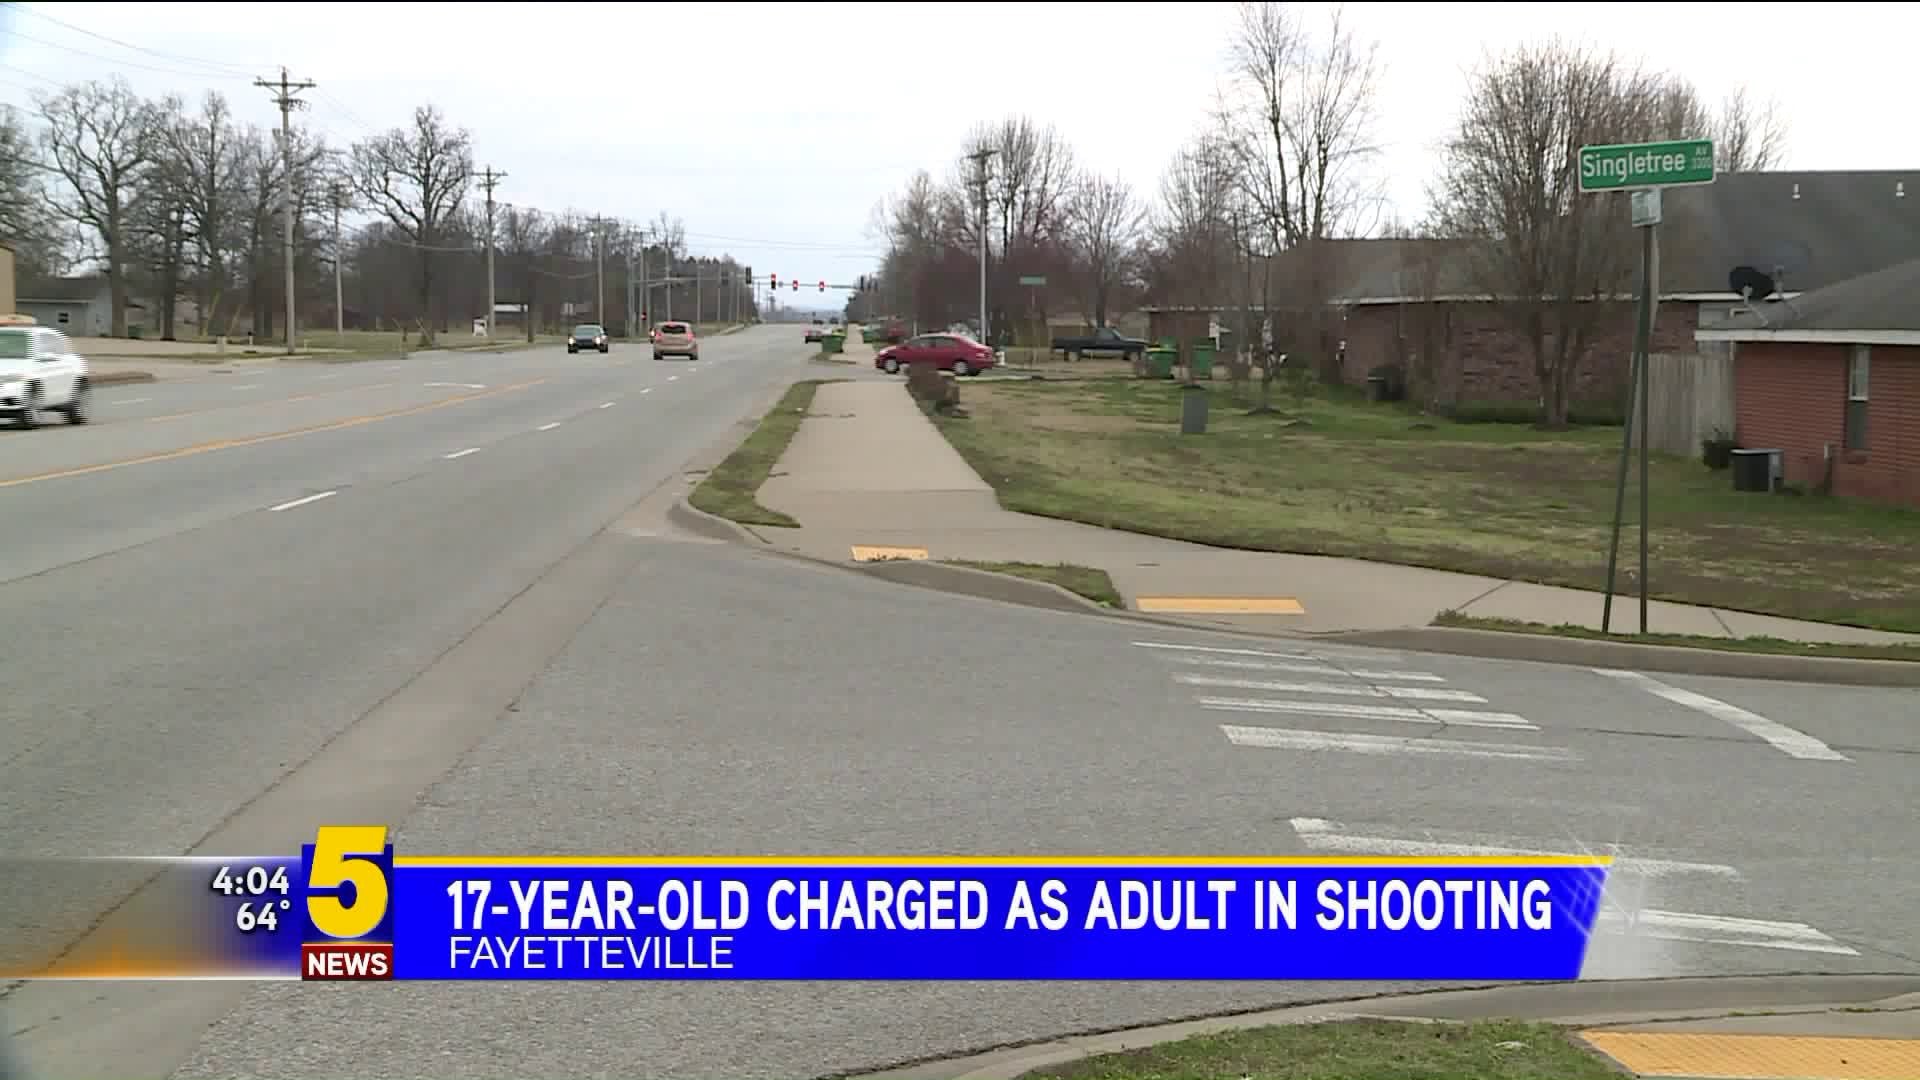 17-year-old Charged As Adult In Shooting